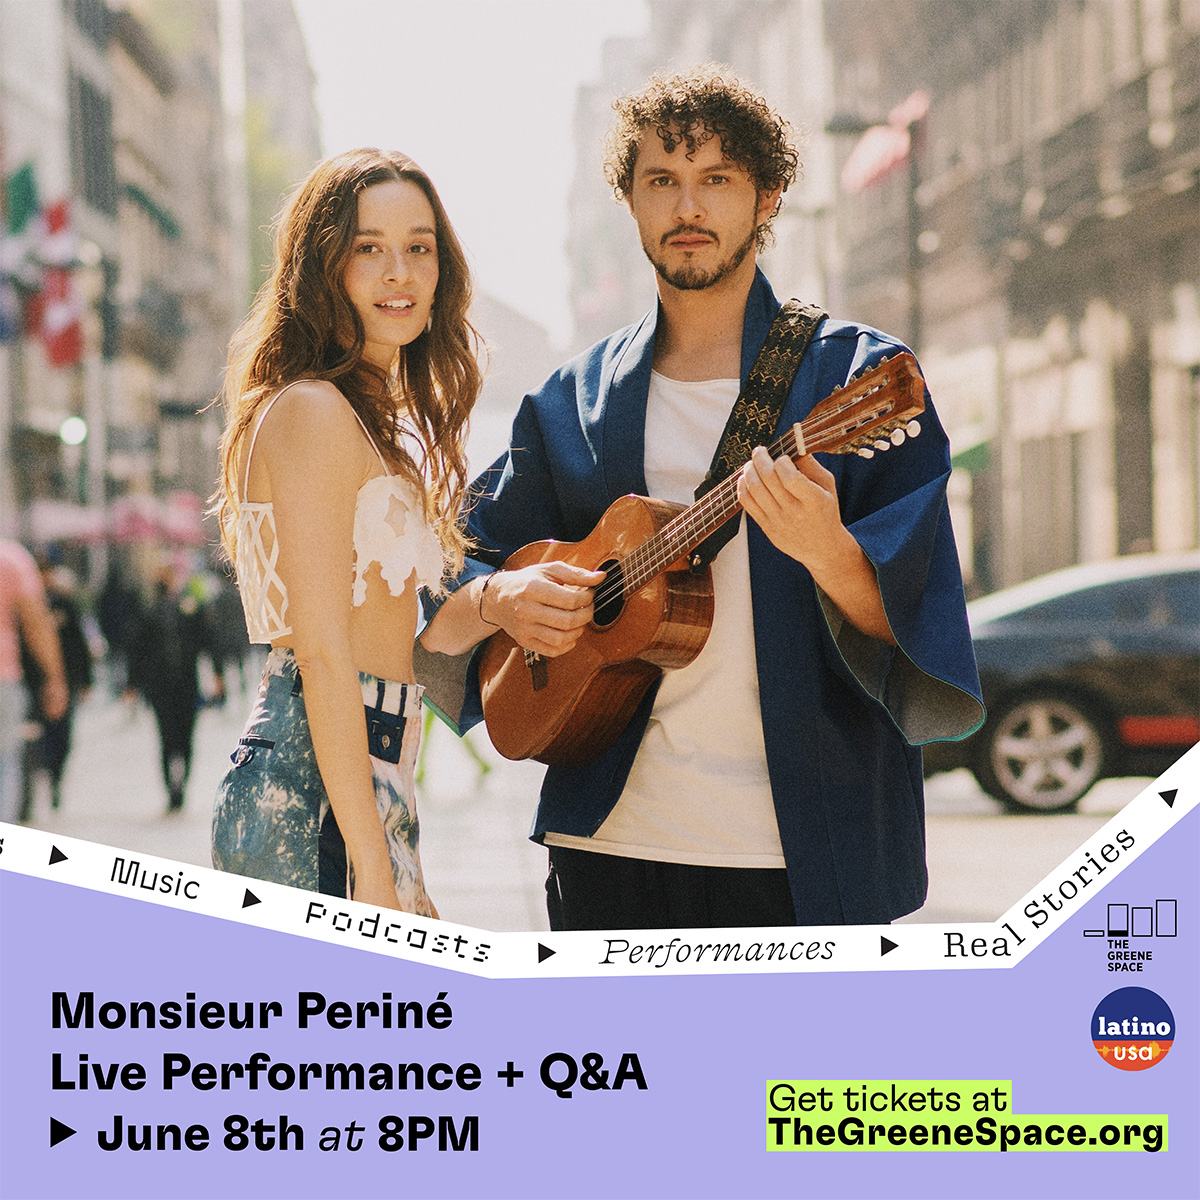 NYC! Don't miss Latin GRAMMY Award-winning band @monsieurperine LIVE in The Greene Space on June 8th! They'll perform their newest album and discuss it with @LatinoUSA's Marta Martinez 💃🏼$10 tickets: bit.ly/3MzT8H5 #newmusic #nyc #wnyc #LatinGRAMMY #nycevents